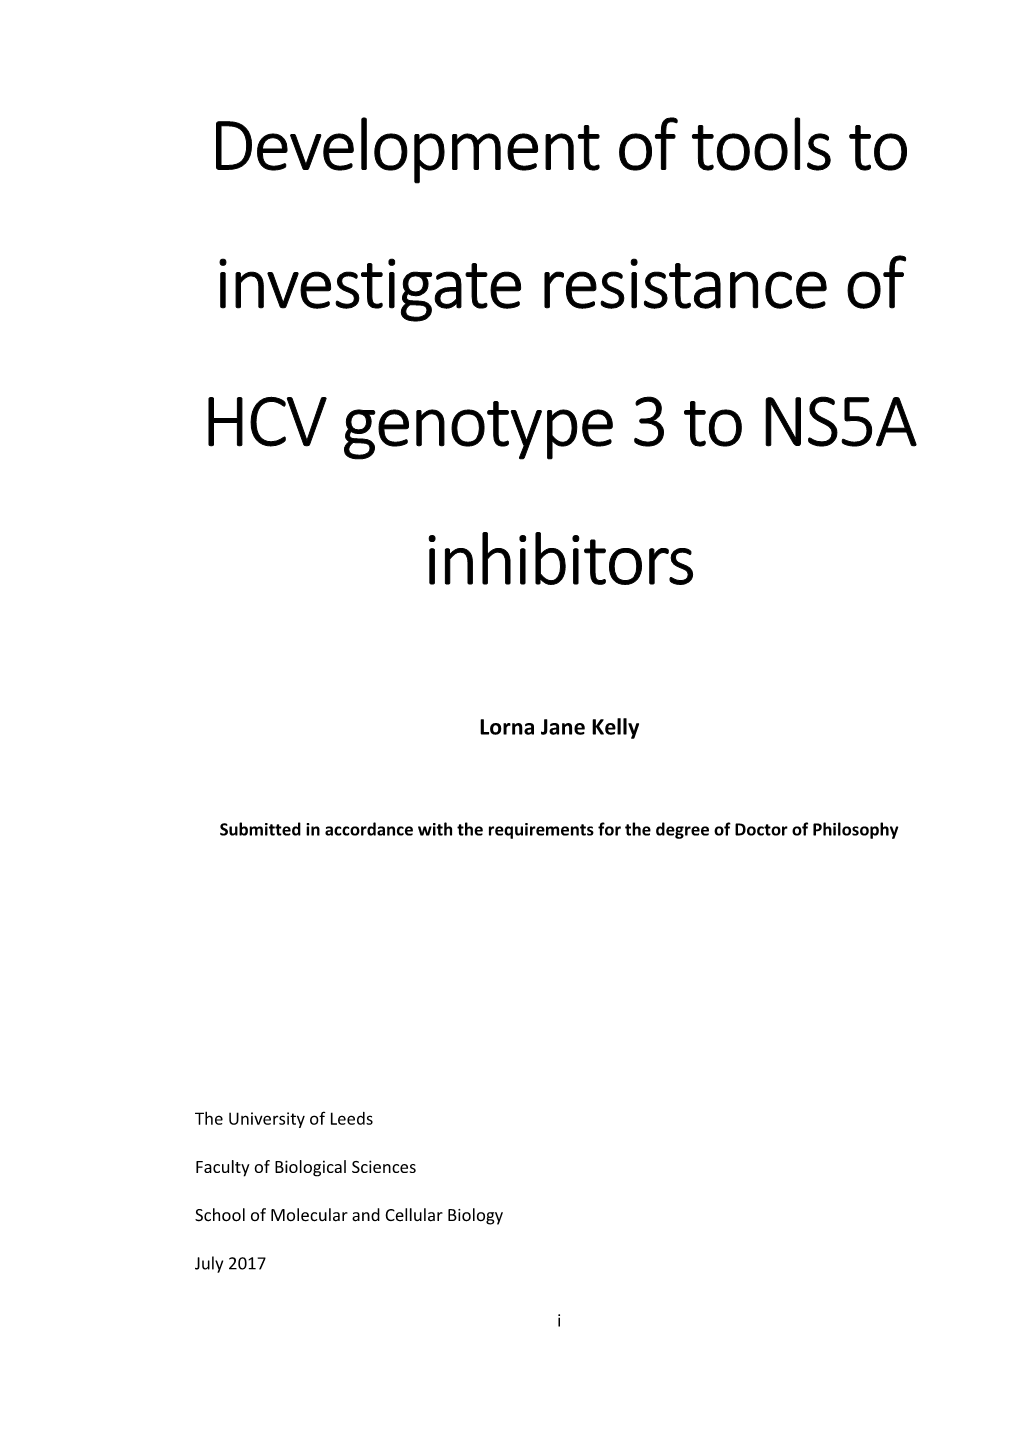 Development of Tools to Investigate Resistance of HCV Genotype 3 to NS5A Inhibitors